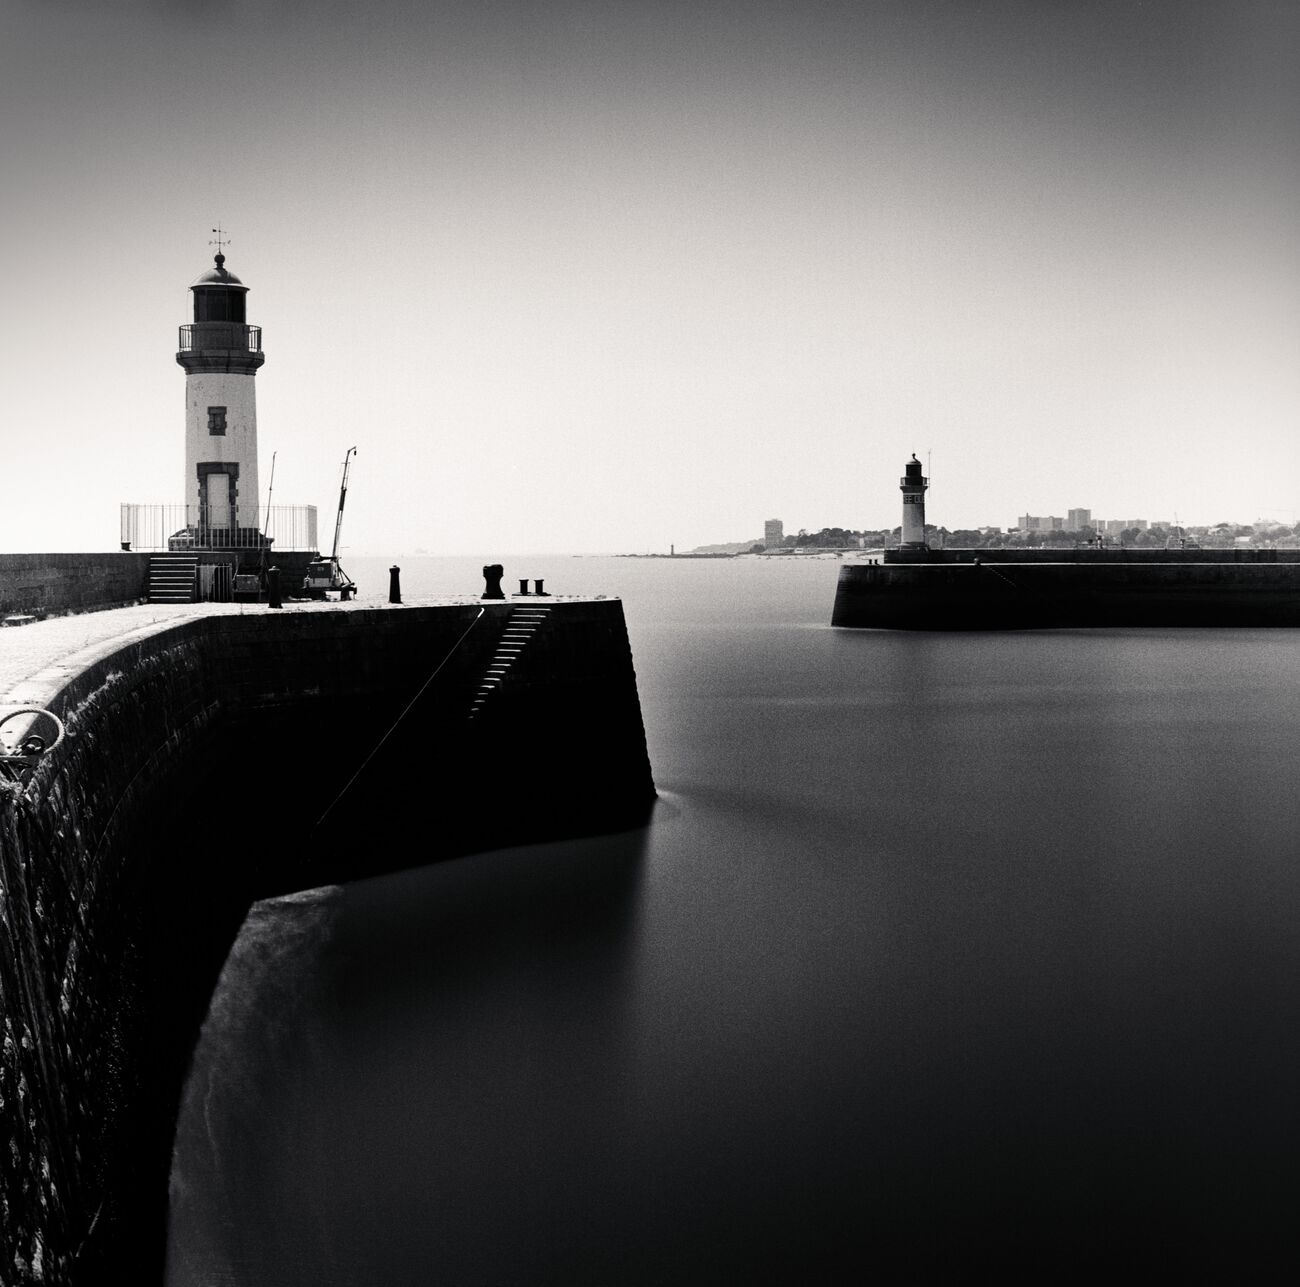 East And West Jetty Lighthouses, Saint-Nazaire, France. Août 2020. Ref-1425 - Denis Olivier Photographie